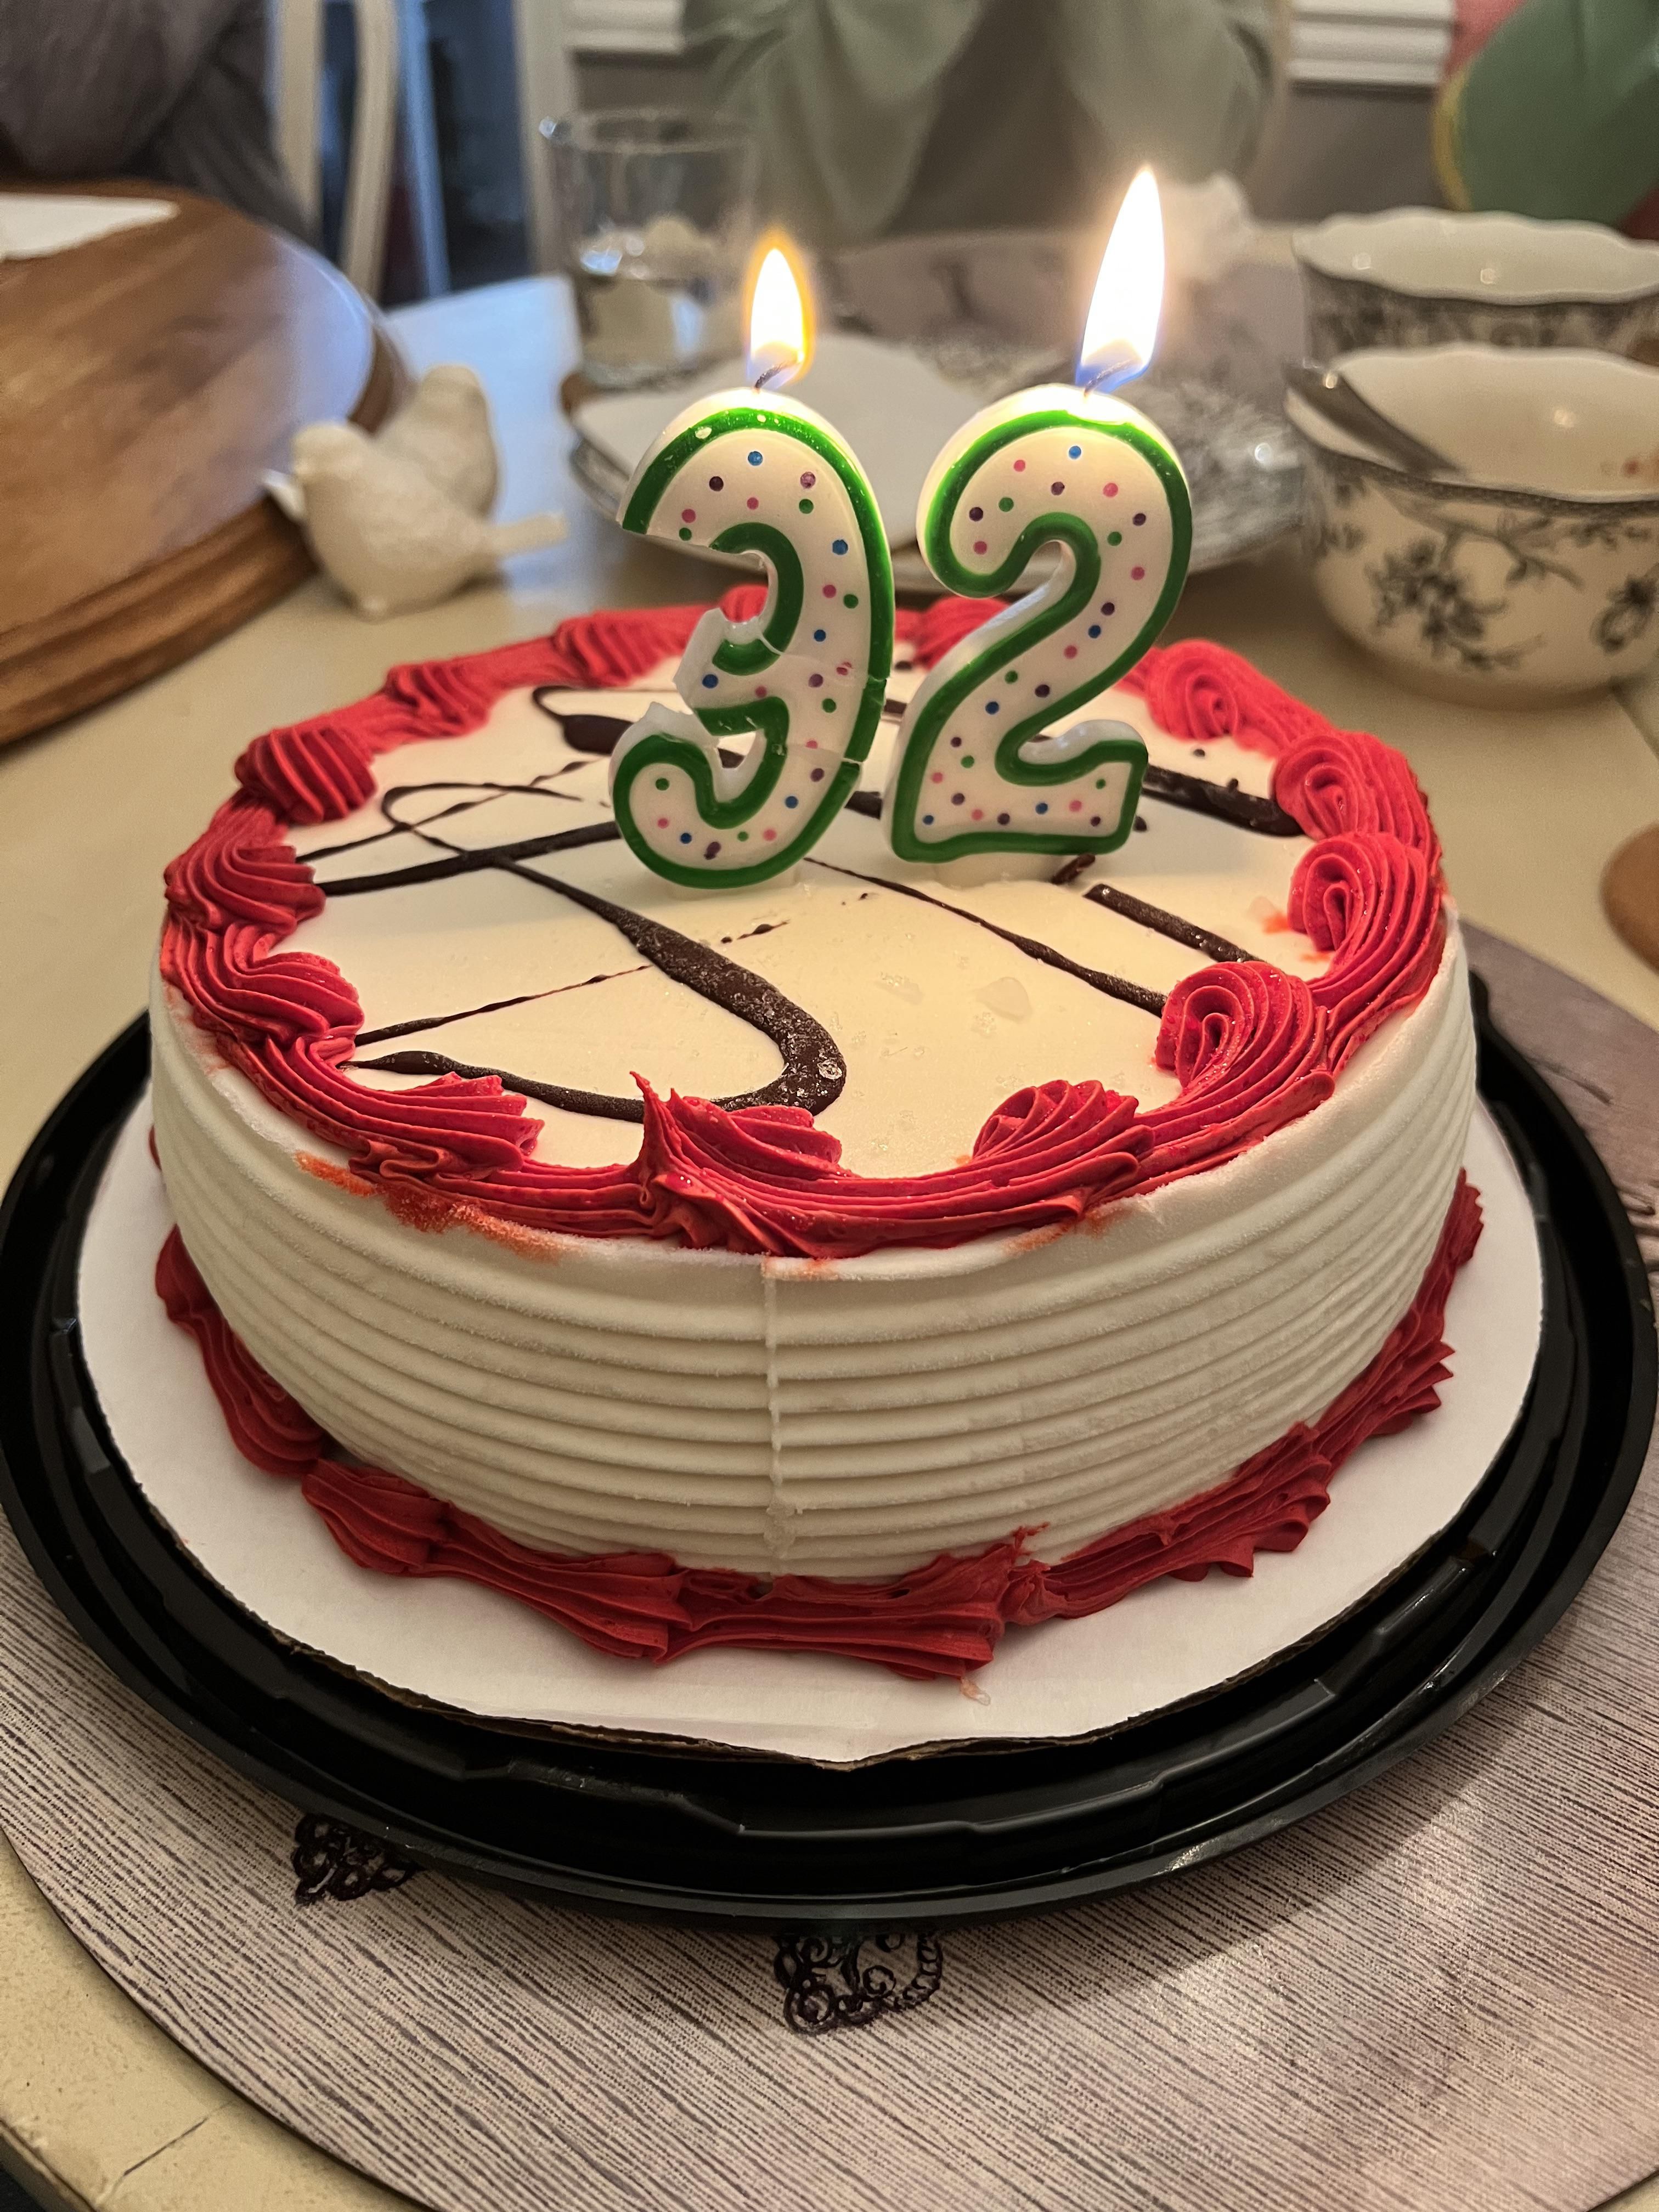 My parents threw me a belated birthday party at their house, and my Mom was confident she had the correct candles before I showed up.